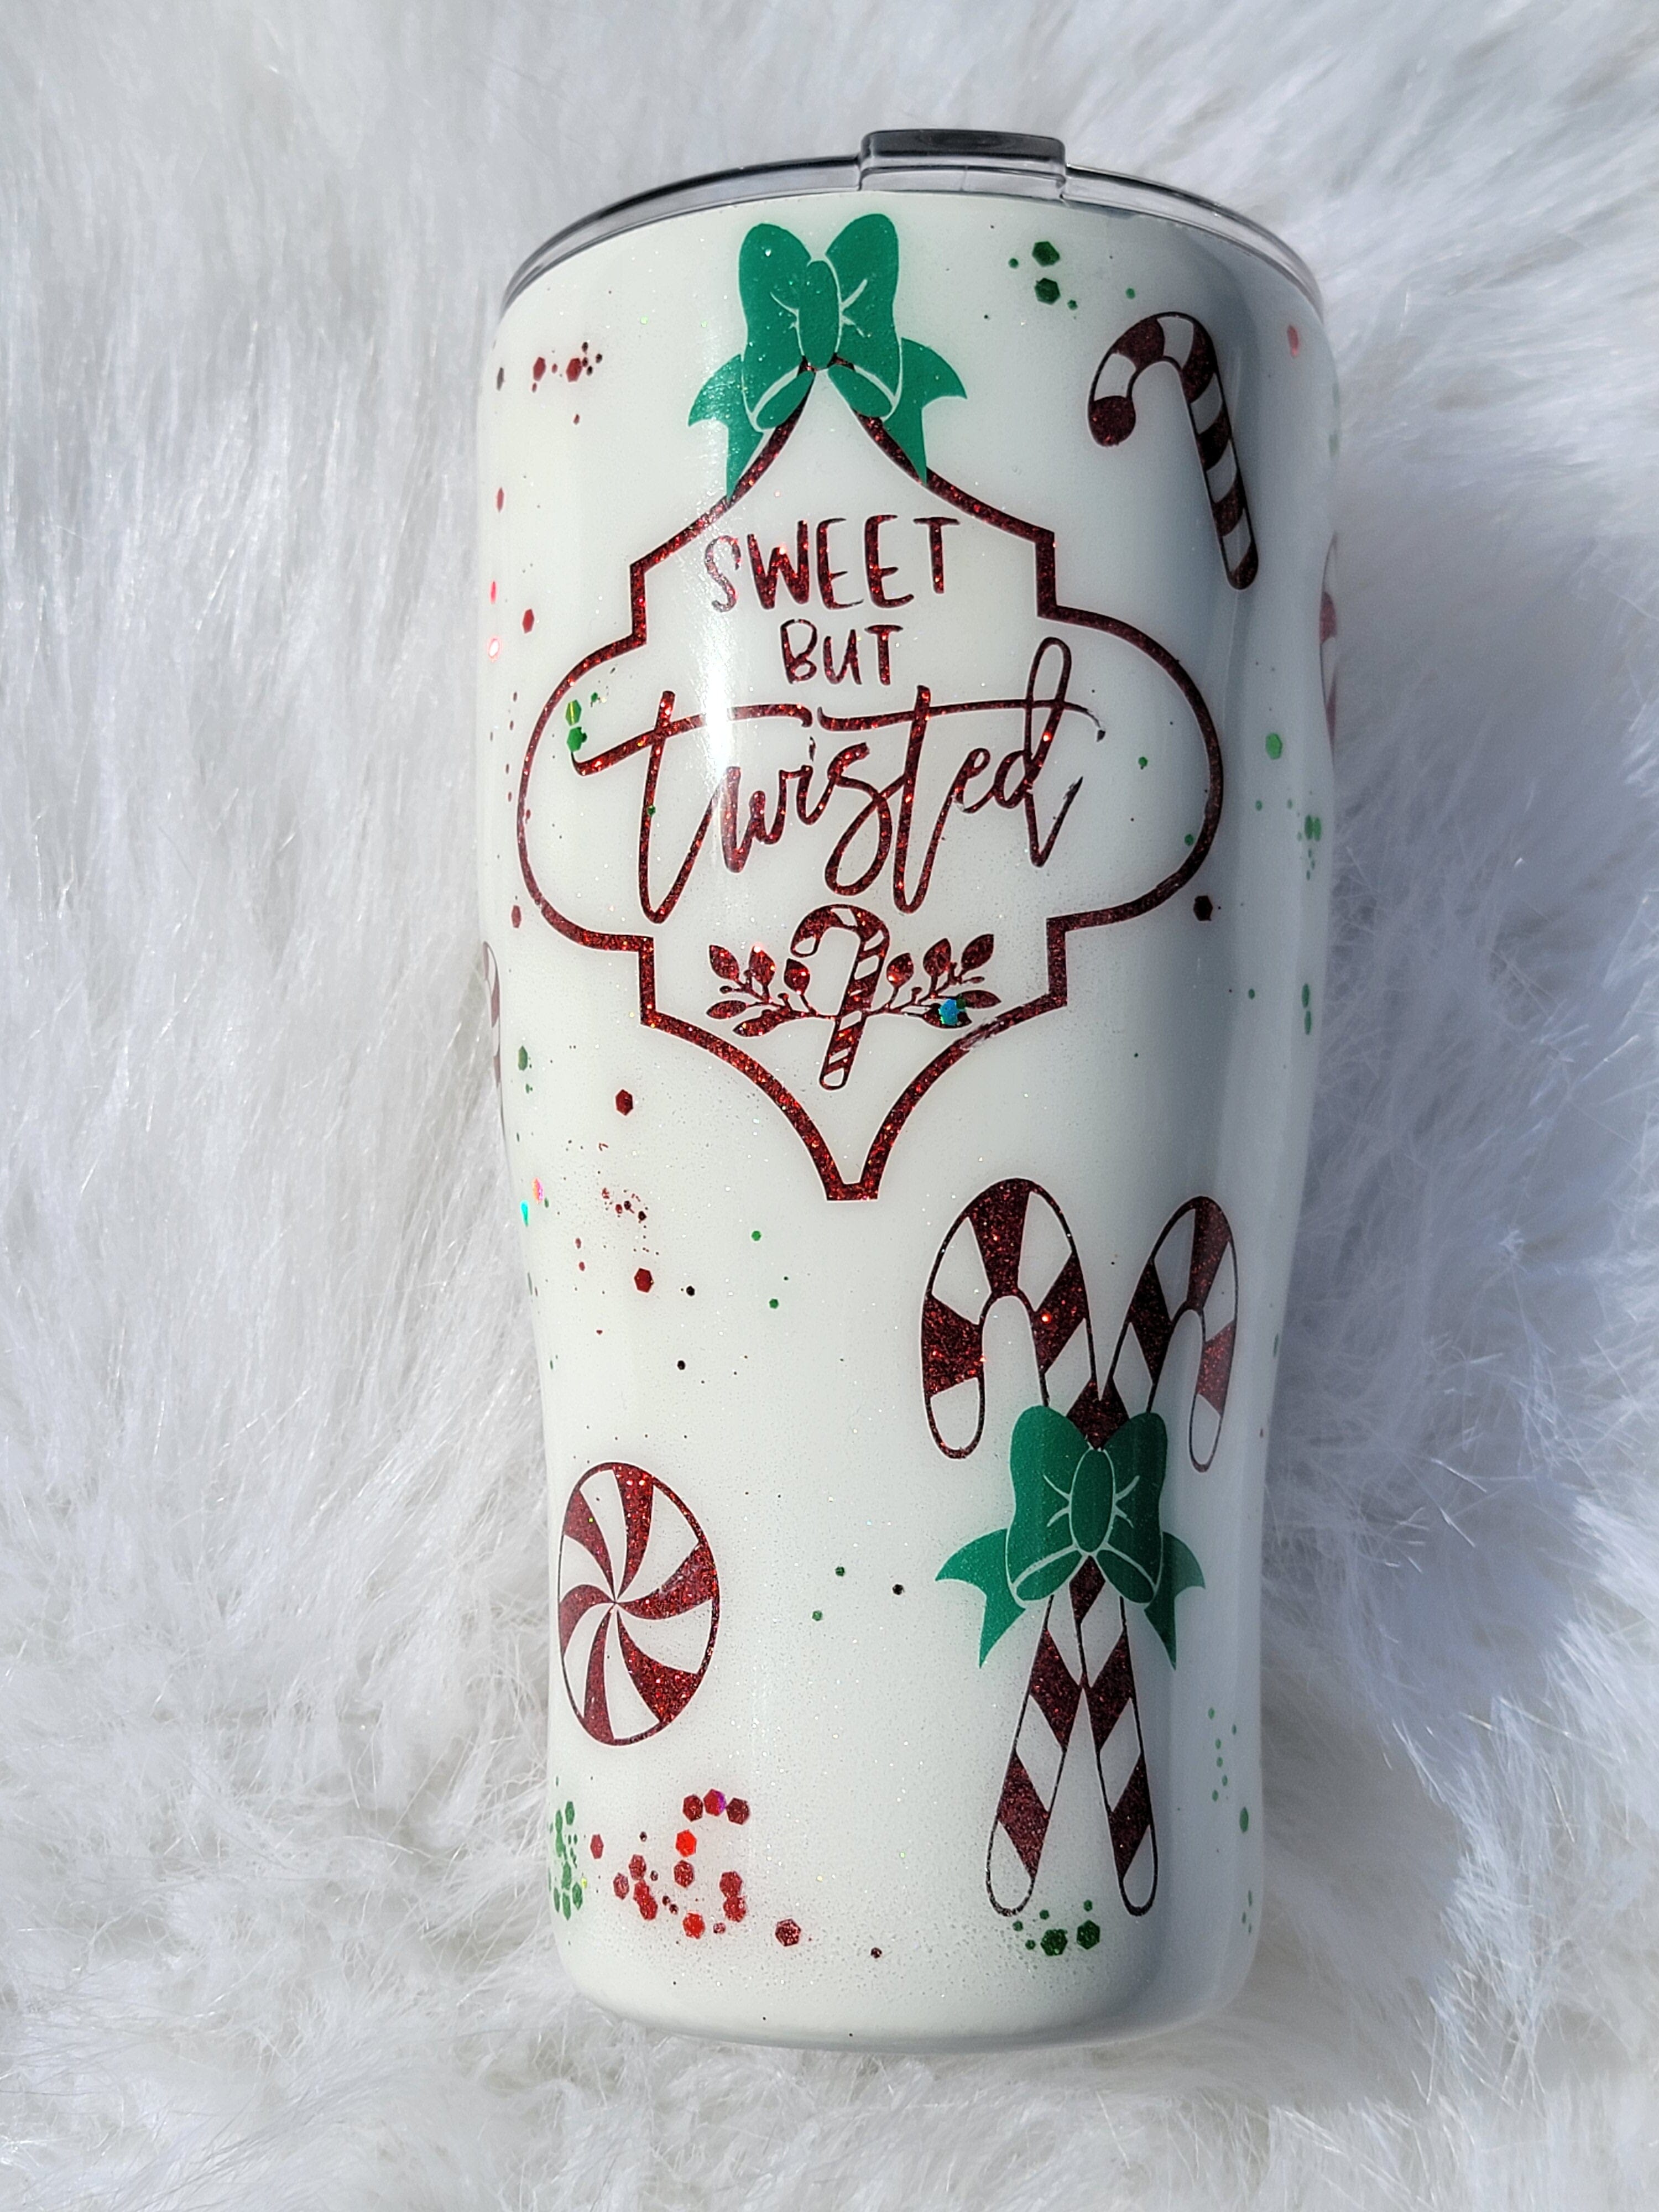 https://cdn.shopify.com/s/files/1/0659/8390/6035/products/old-fashioned-candy-cane-tumbler-gravesfamilycreations-156595.jpg?v=1689509626